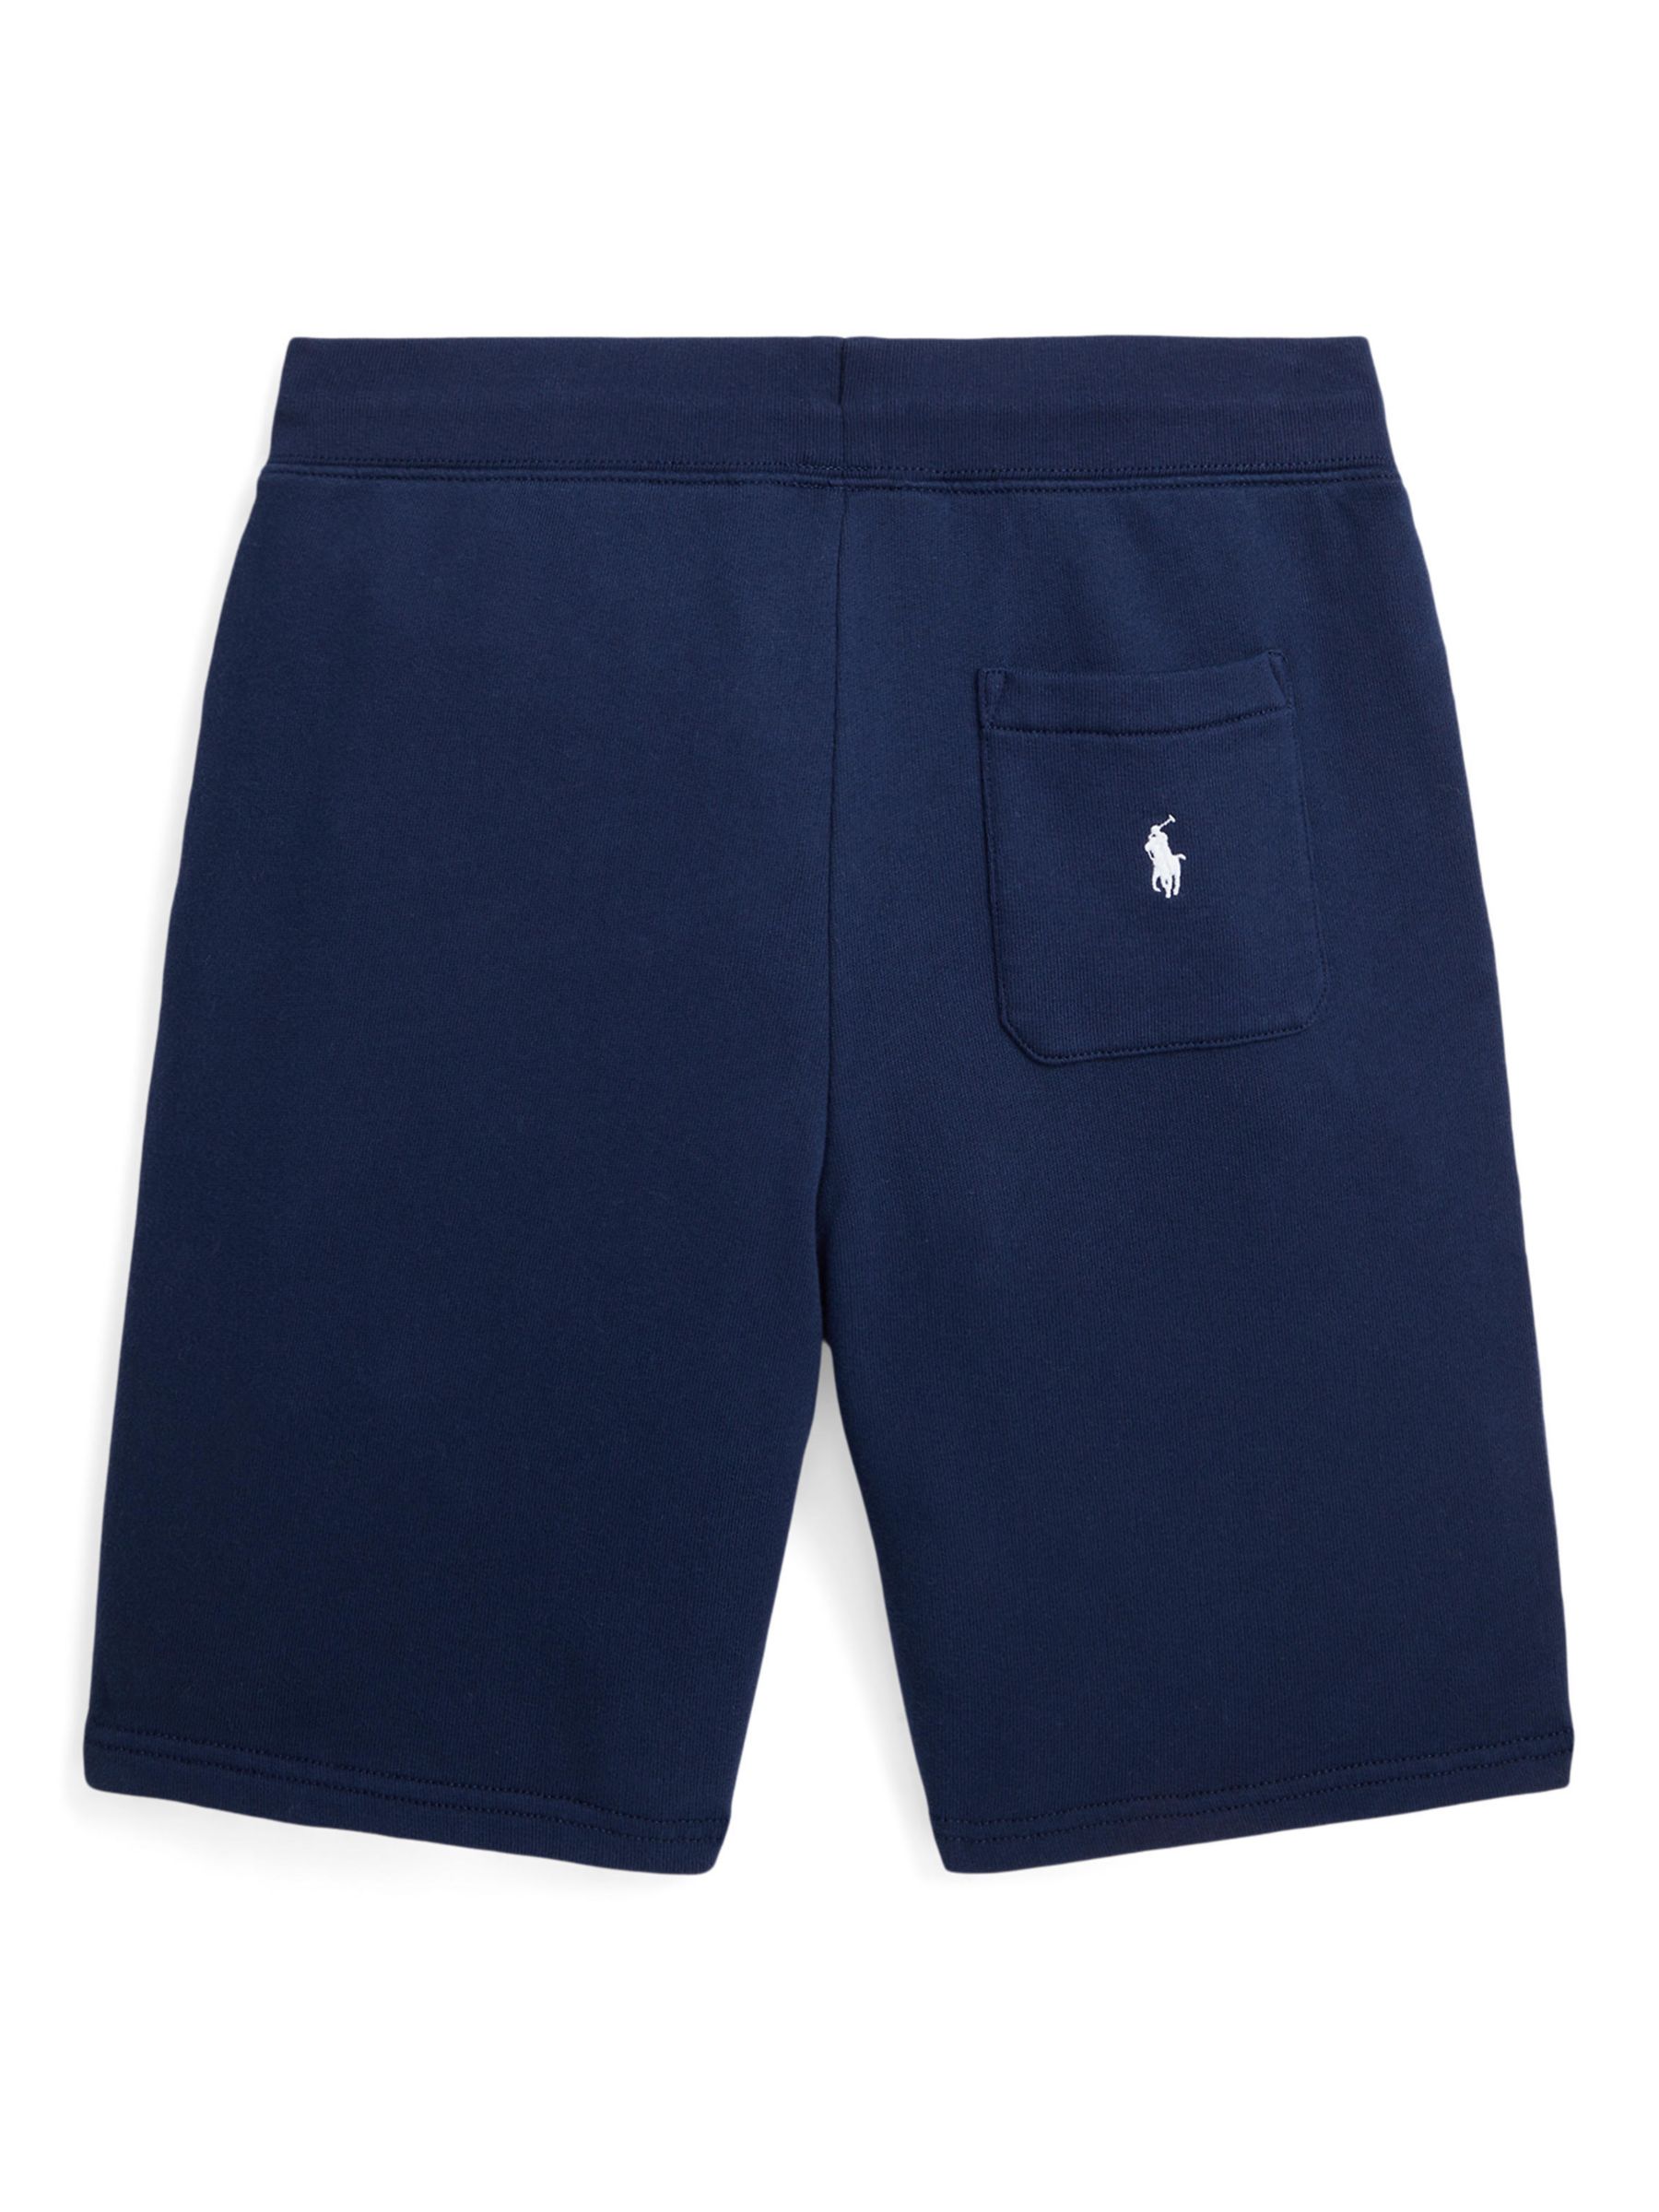 Ralph Lauren Kids' Polo Athlectic Spa Terry Shorts, Blue Navy, M